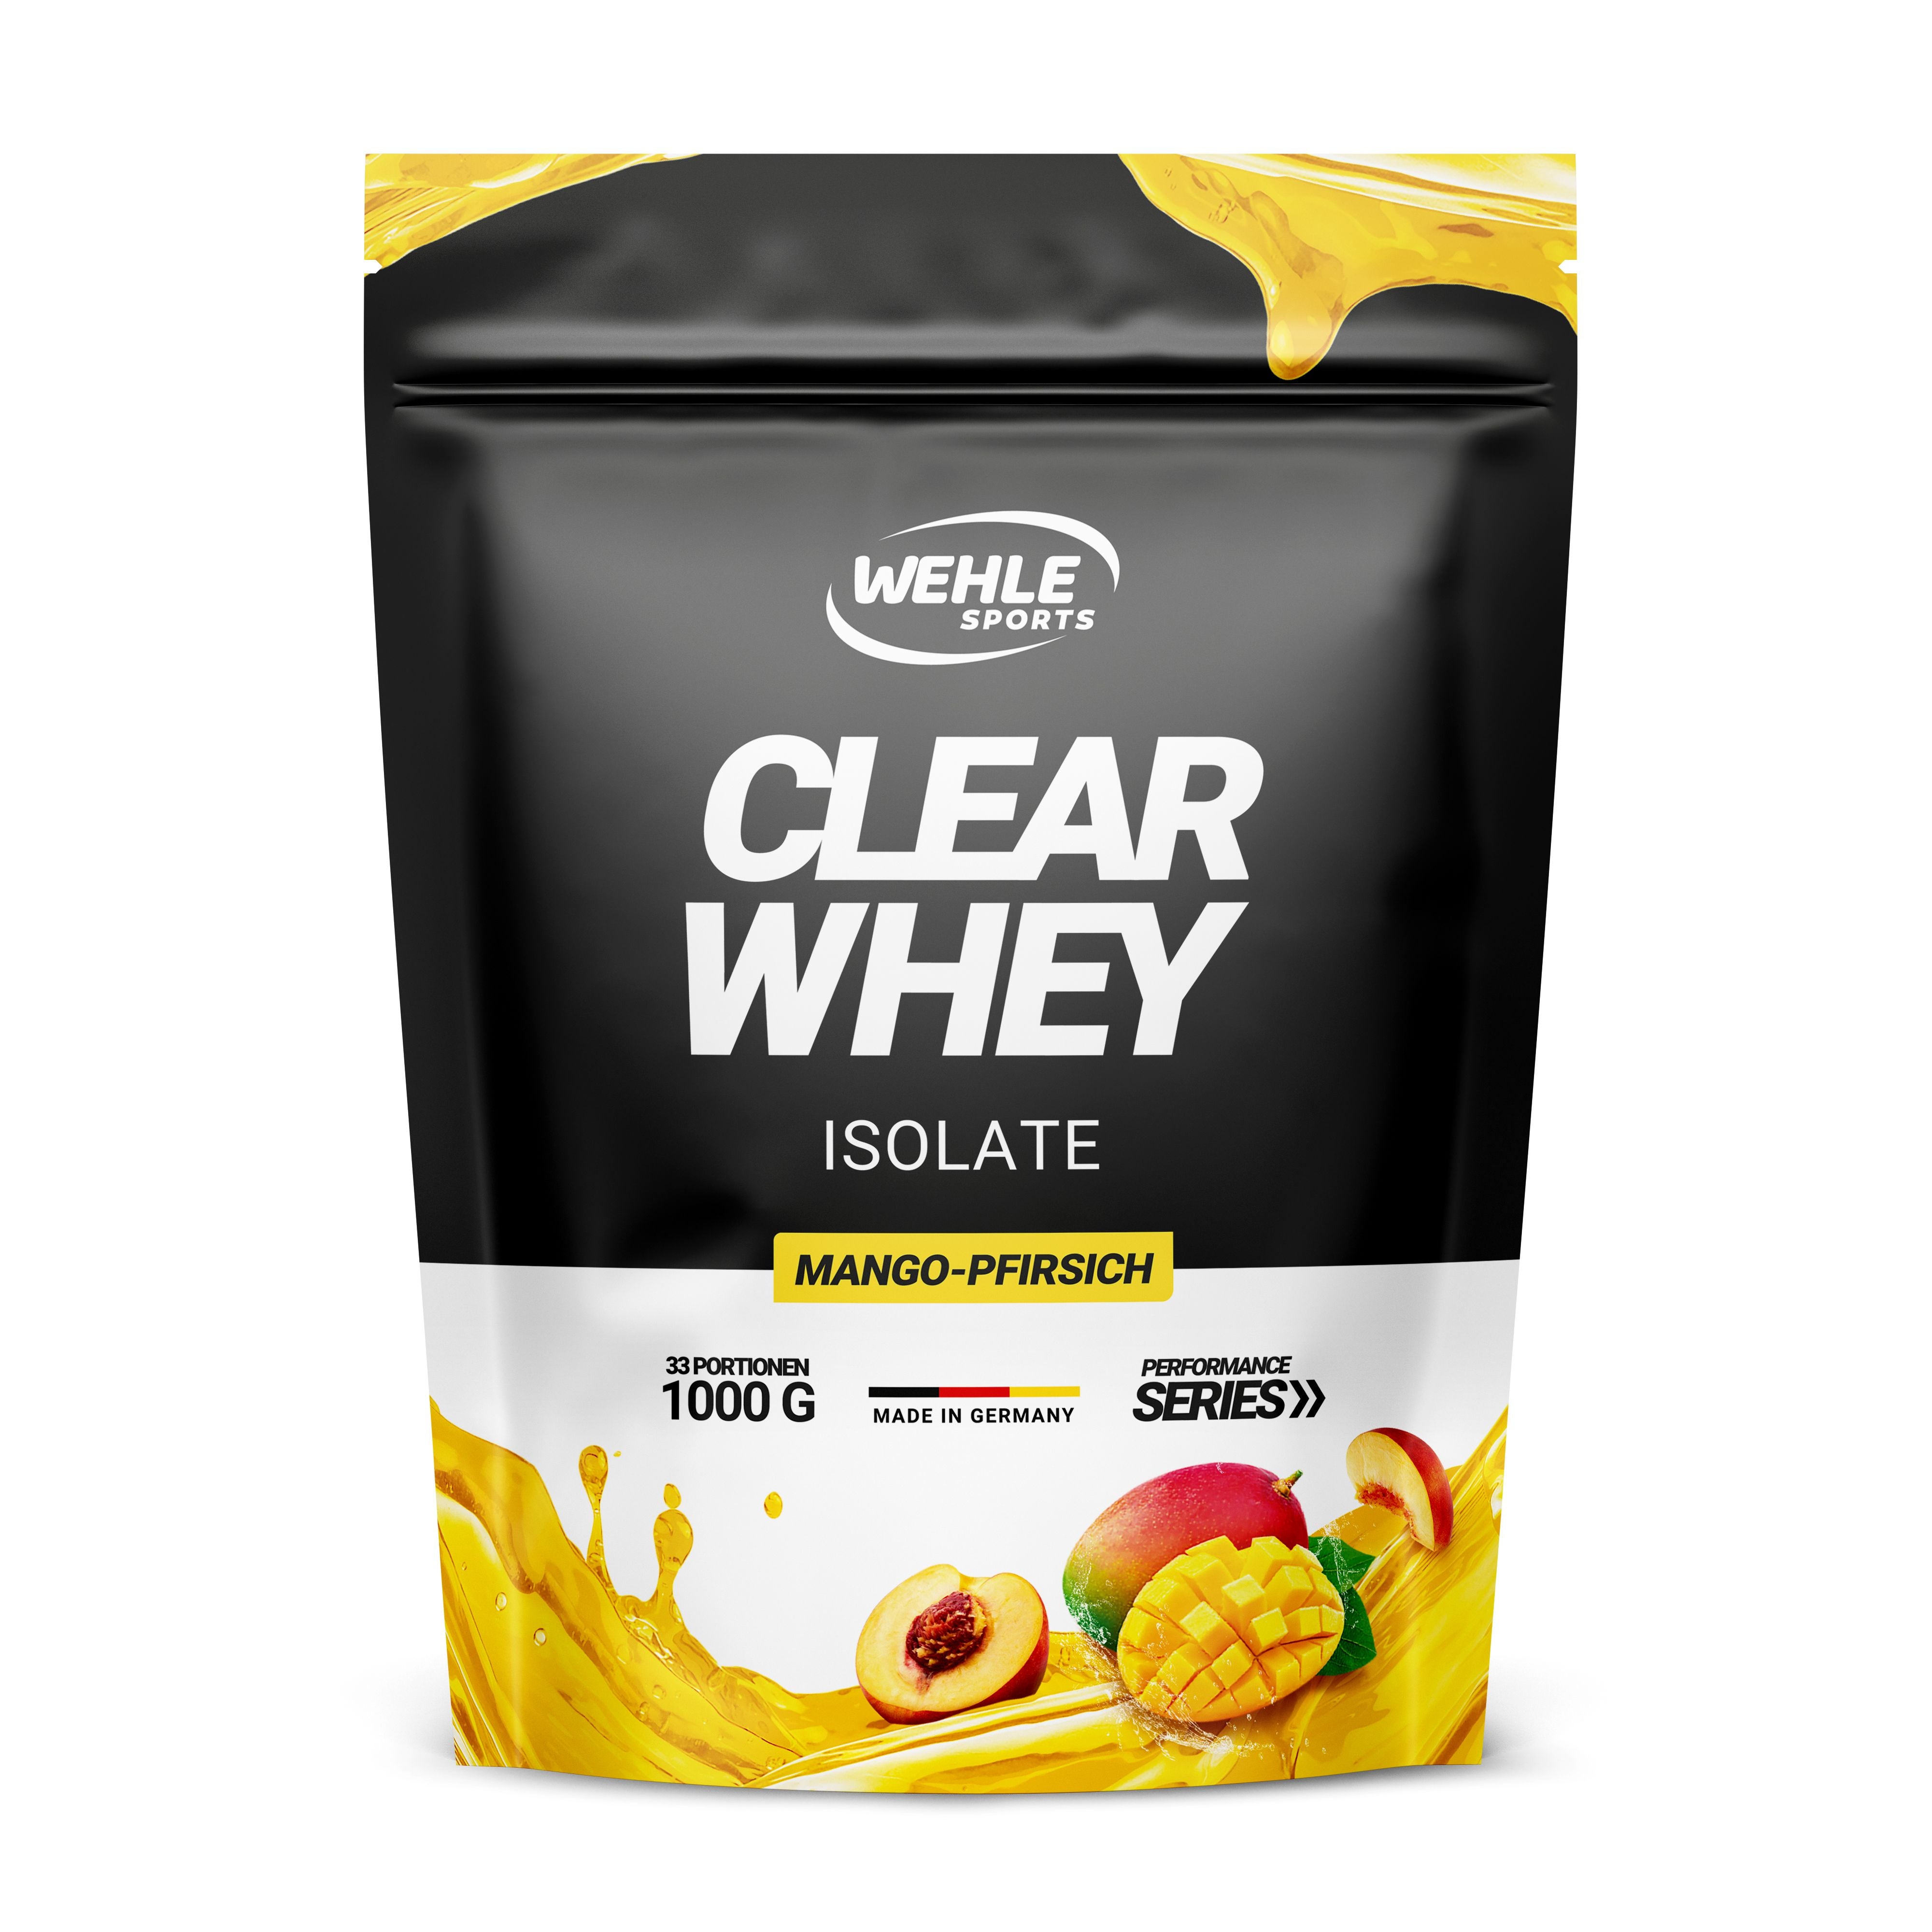 Wehle Sports Clear Whey Isolate - 1000g Beutel